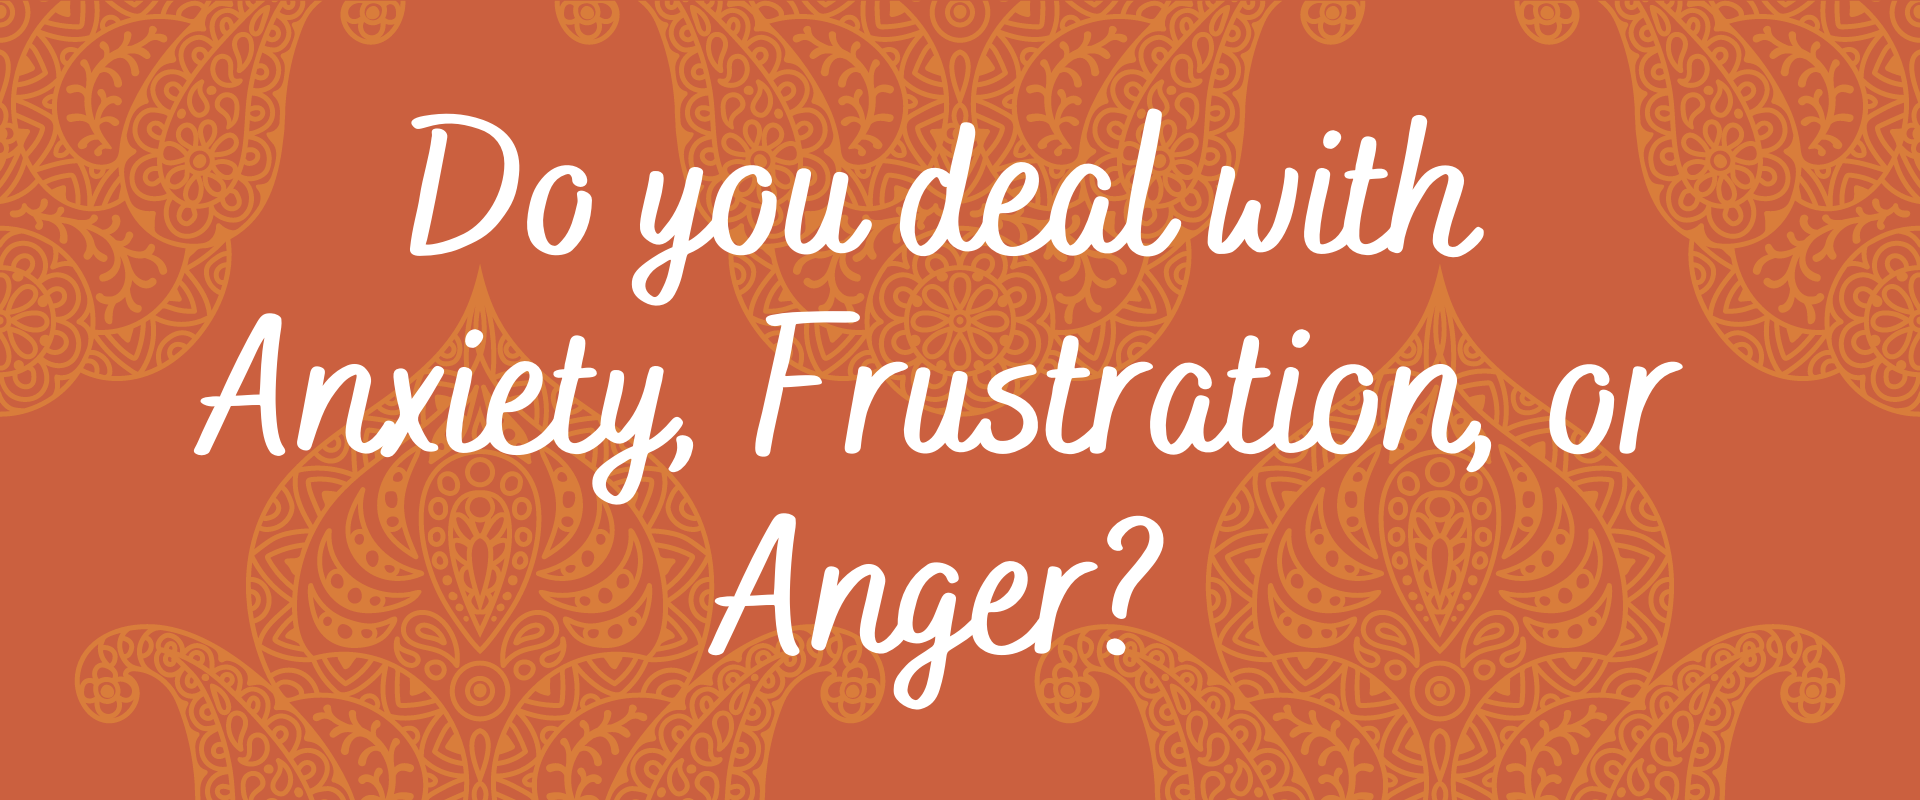 Are You Dealing With Anxiety, Frustration, Or Anger?